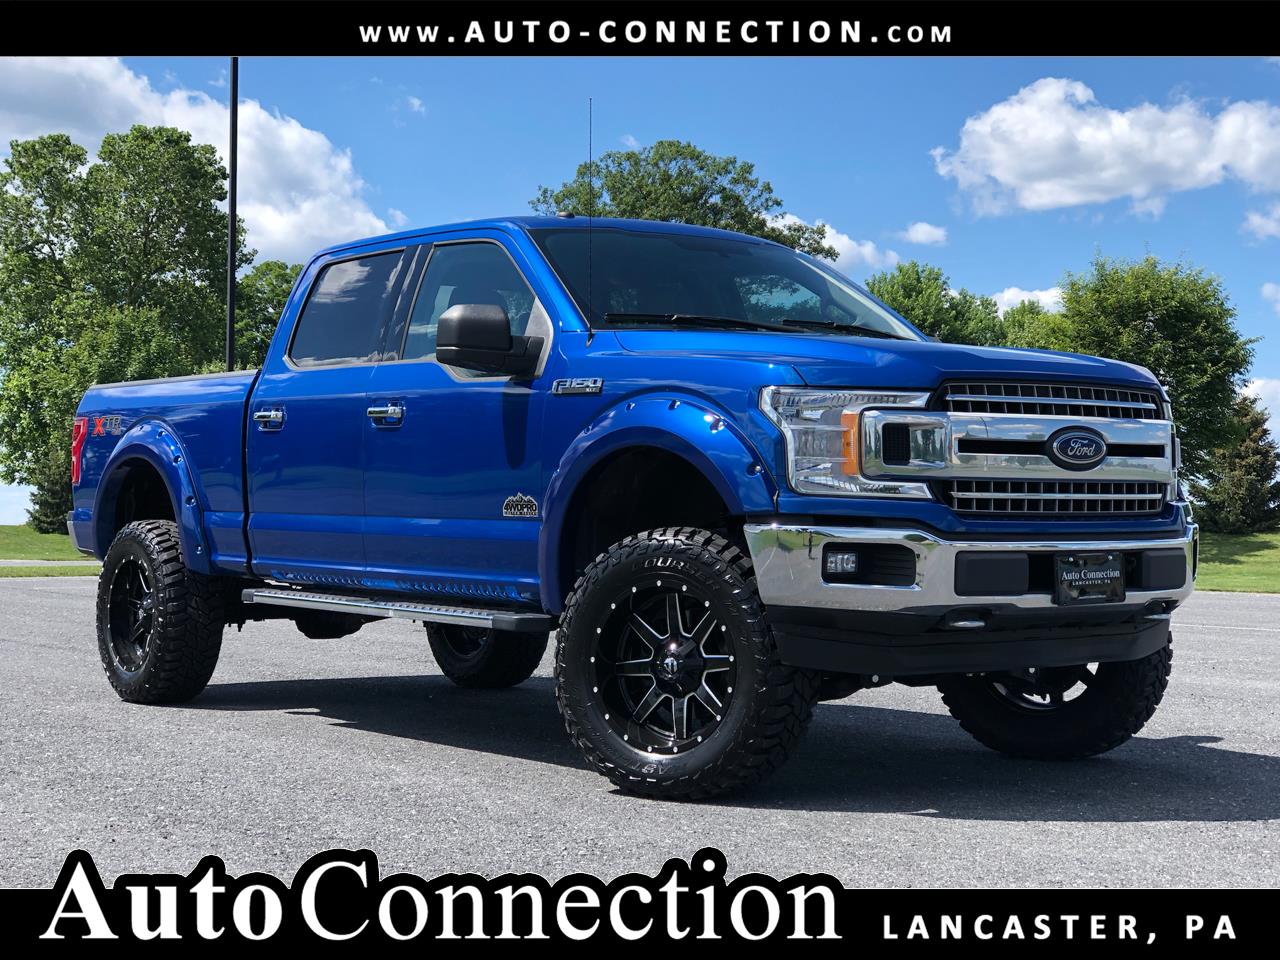 Used 2018 Ford F-150 XLT SuperCrew 6.5-ft. Bed 4WD for Sale in 2018 Ford F 150 Xlt Supercrew 6.5 Ft Bed 4wd